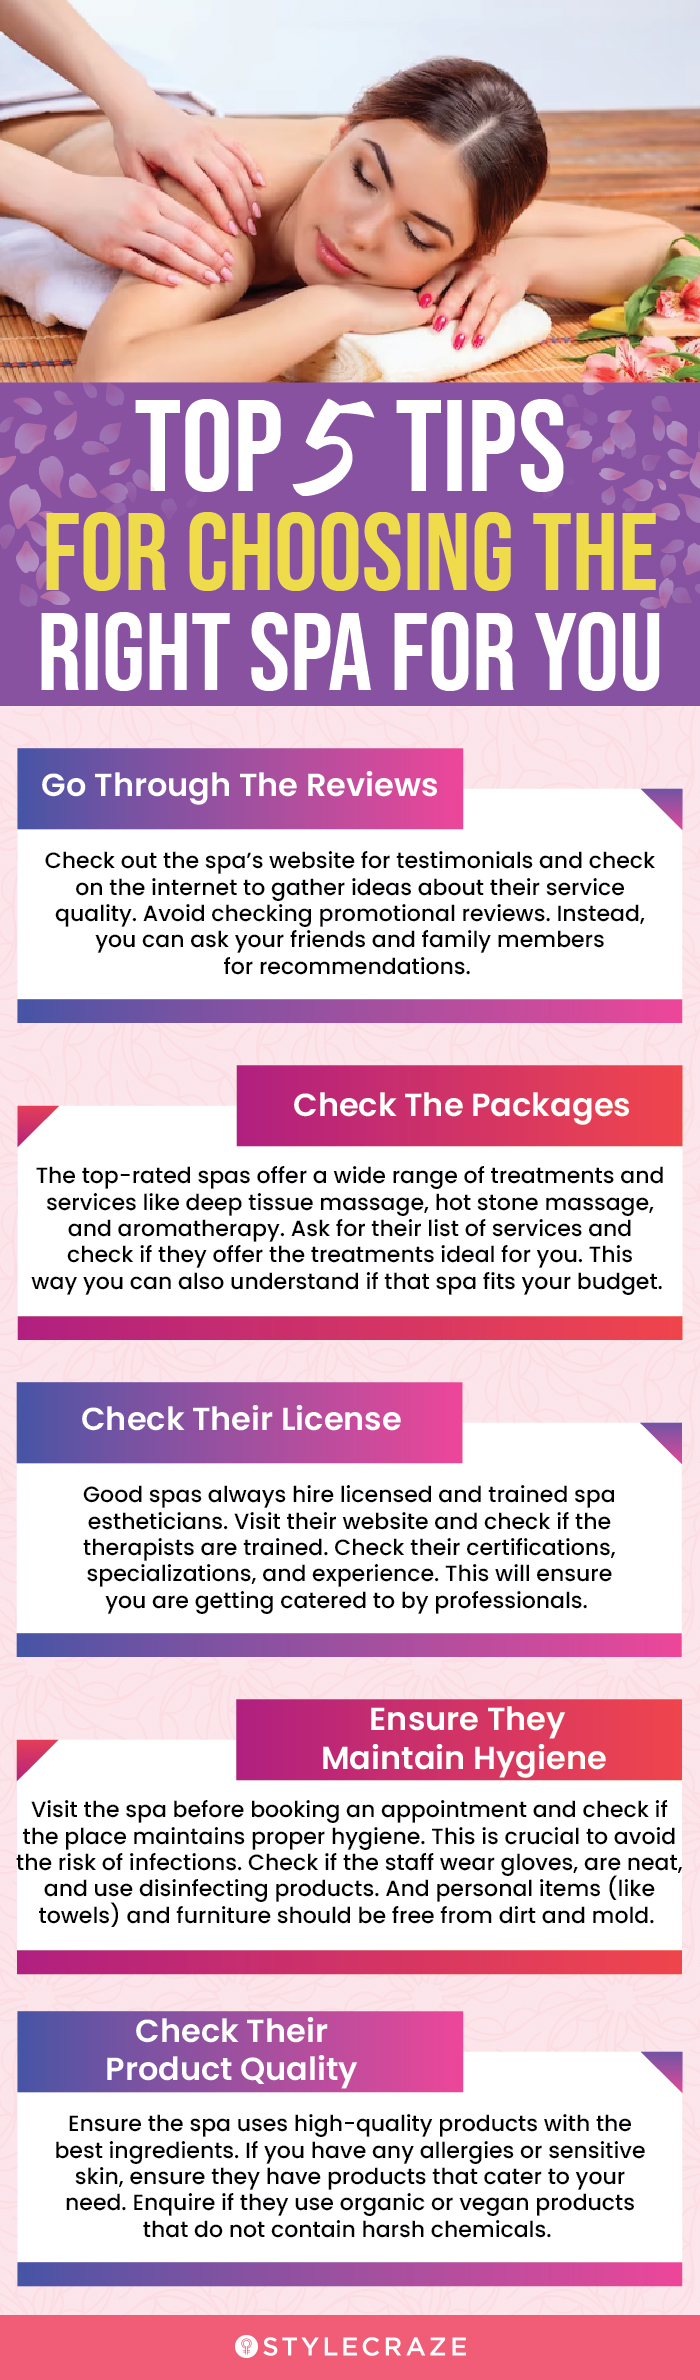 top 5 tips for choosing the right spa for you (infographic)